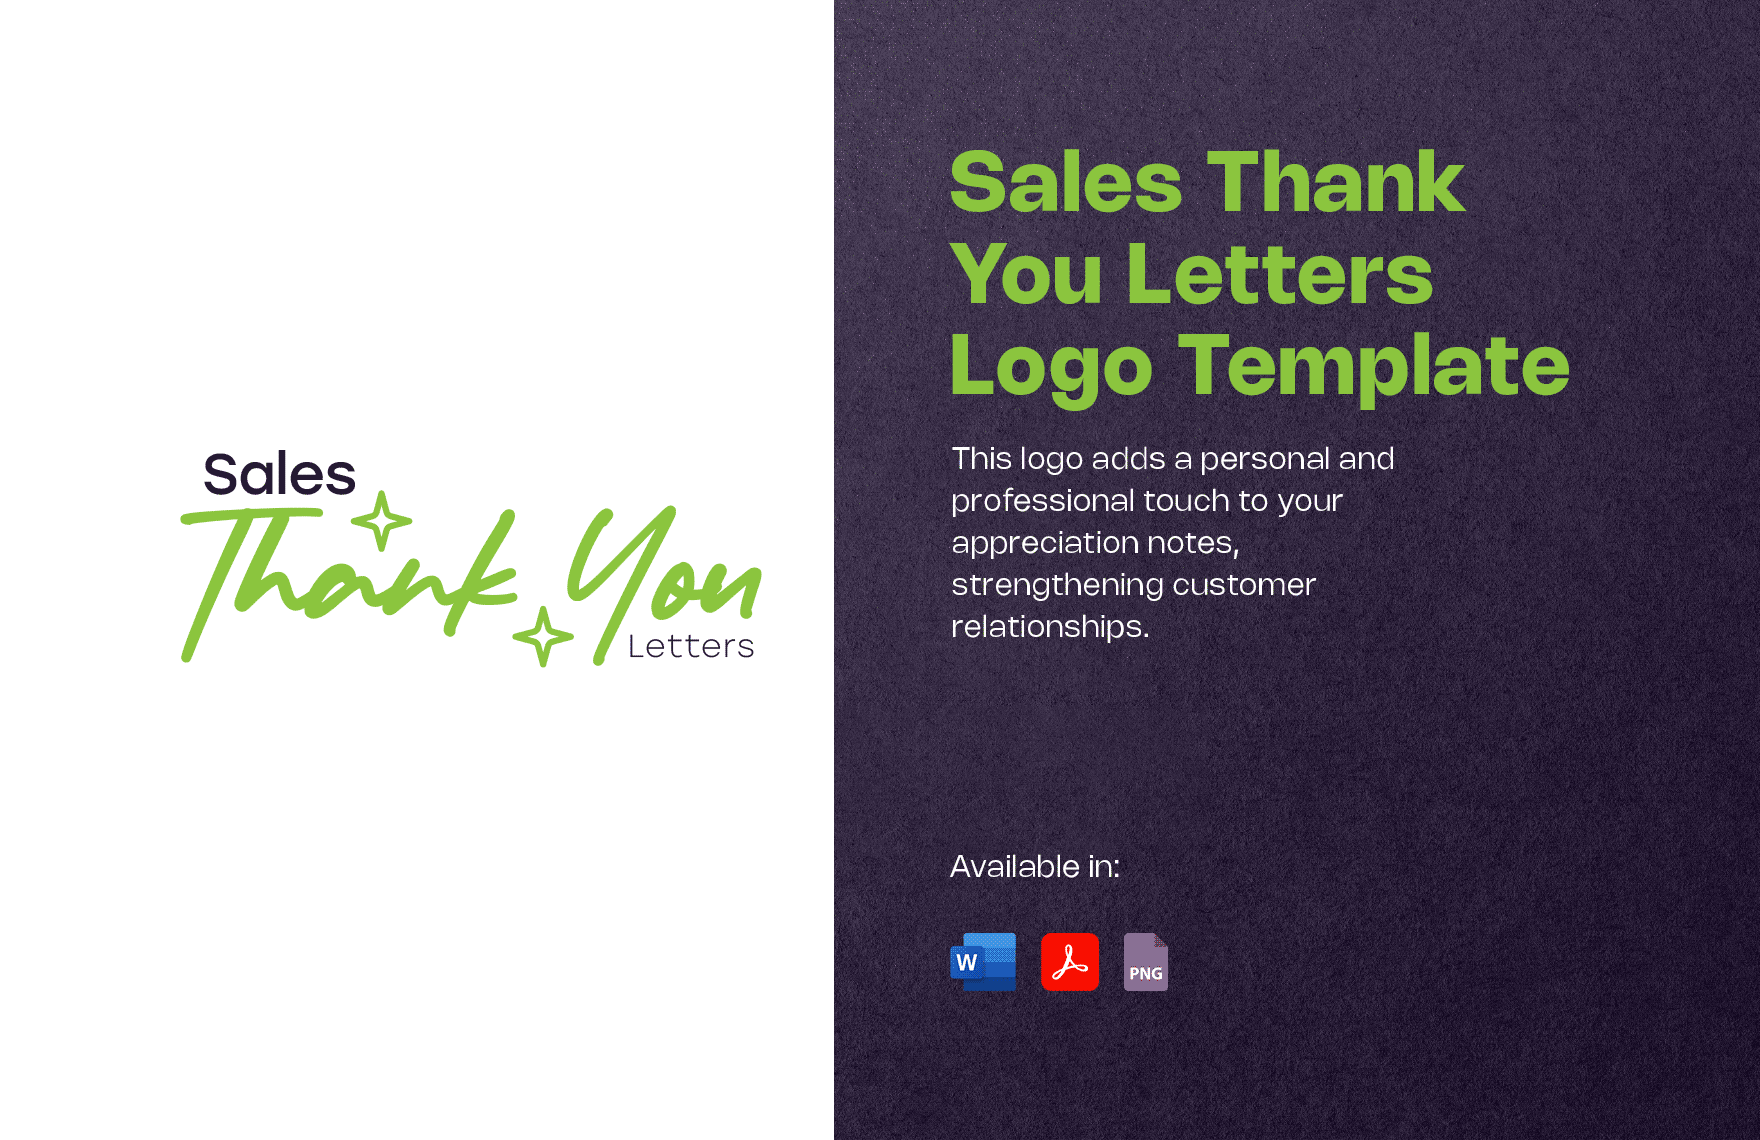 Sales Thank You Letters Logo Template